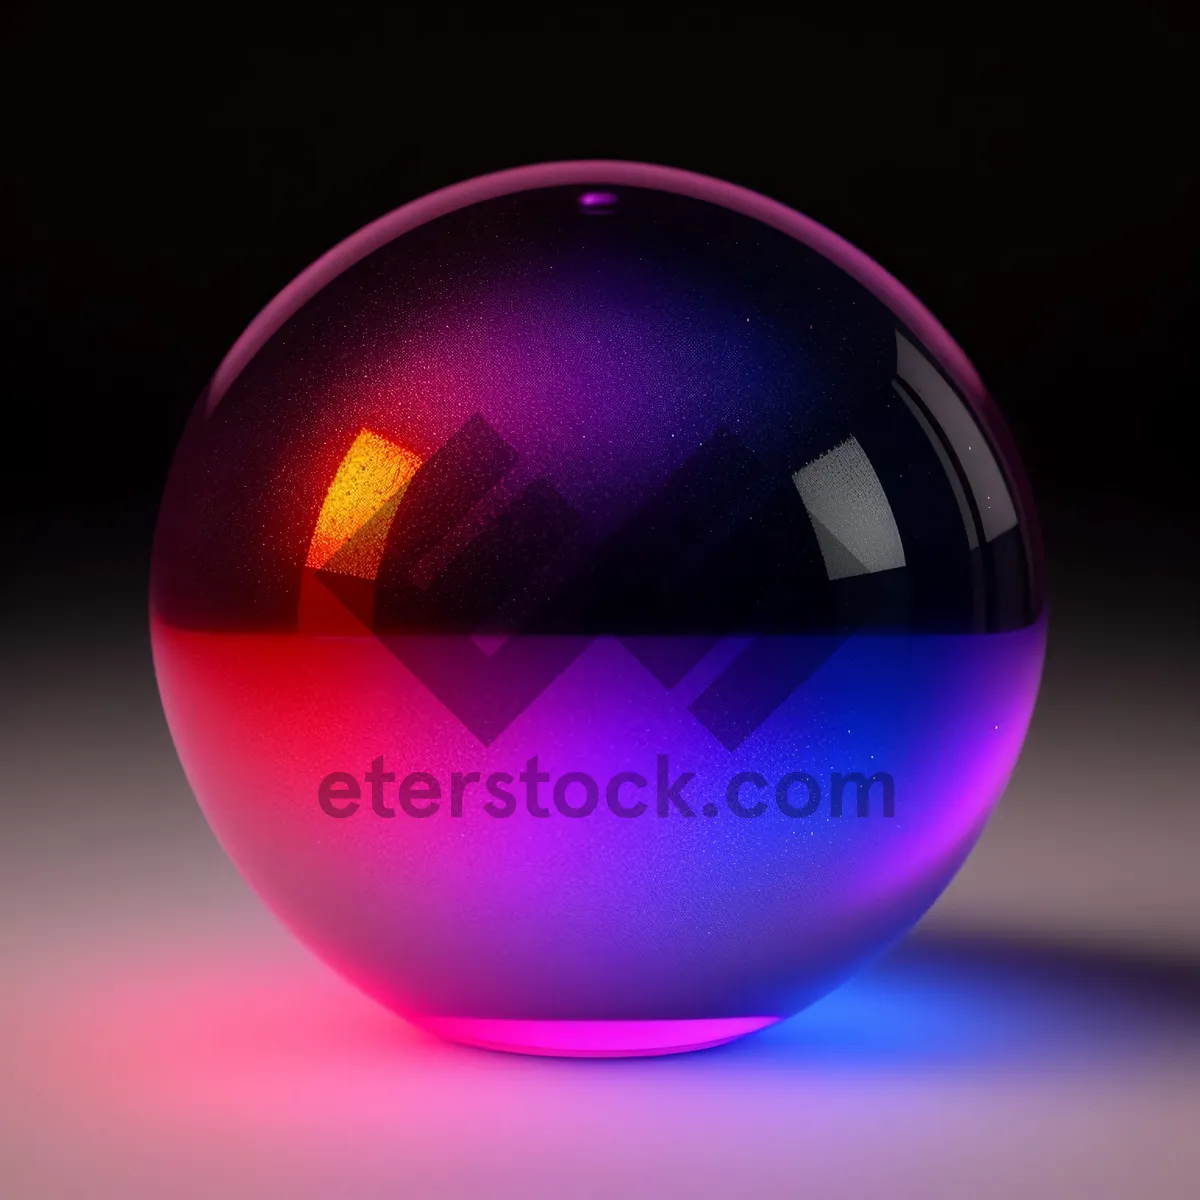 Picture of Glossy Glass Sphere Button Set - Bright, Shiny, and Round